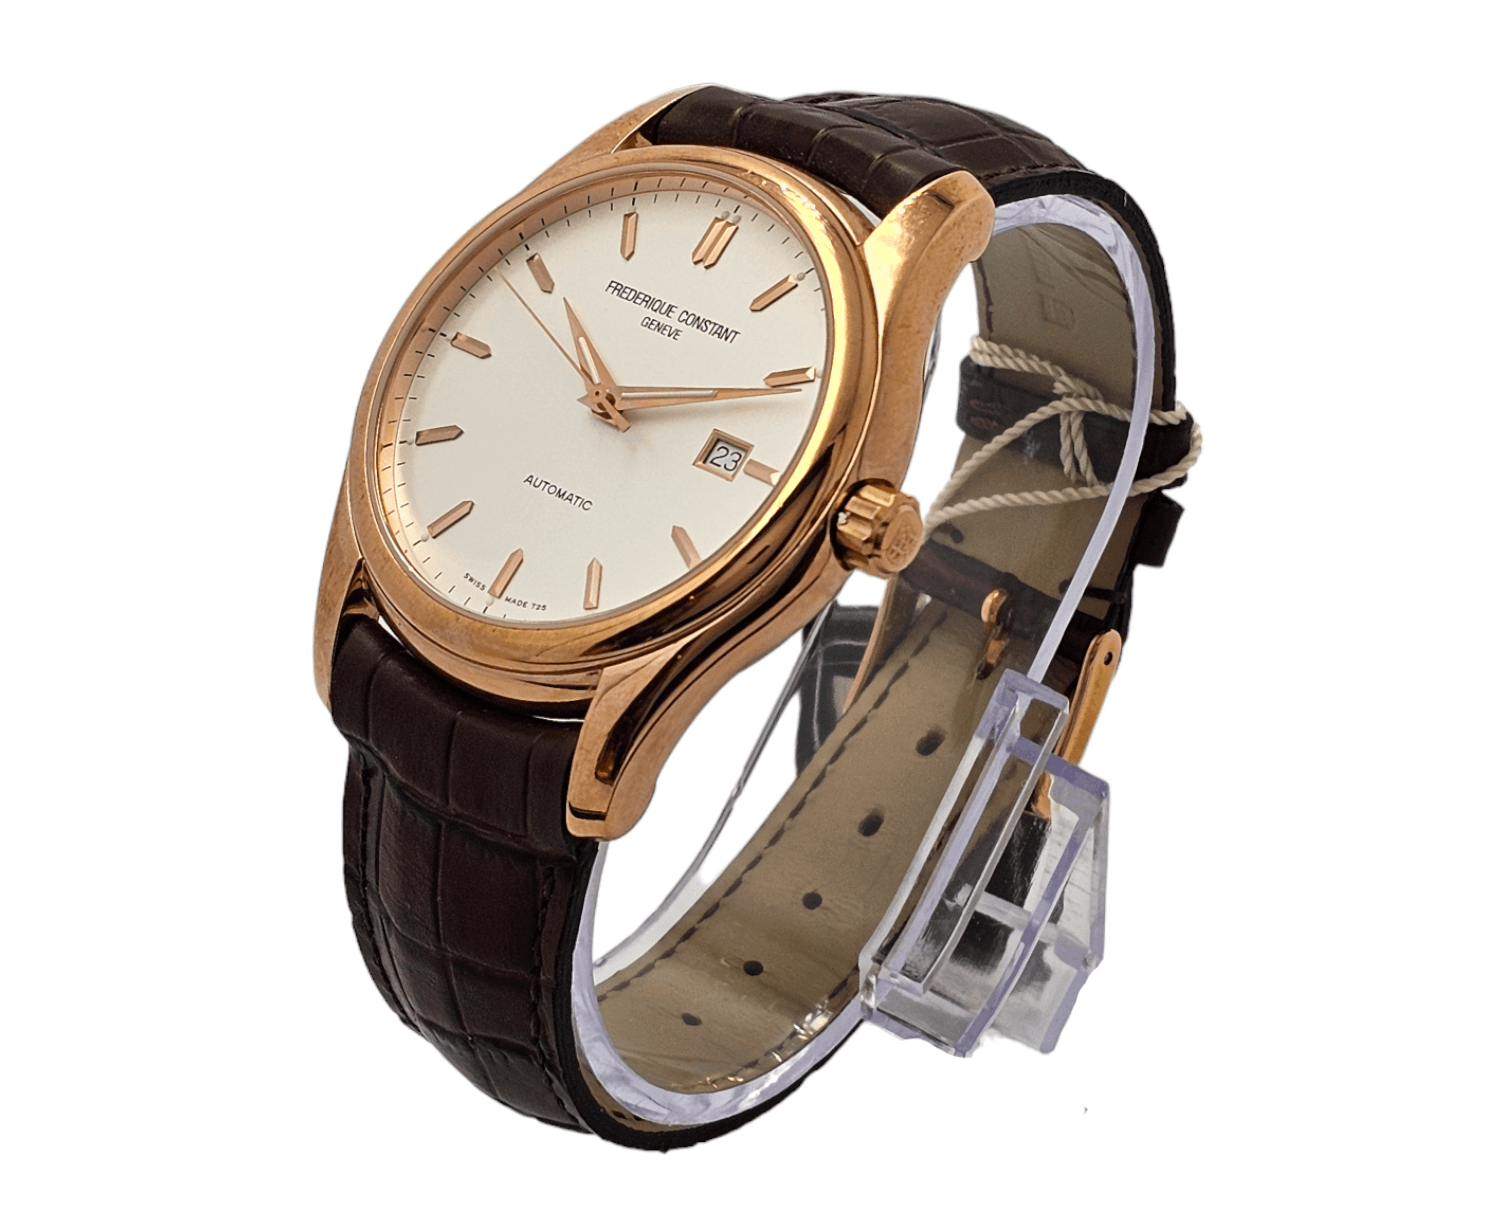 Frederique Constant Clear Vision Index Ref. FC303V6B4 - ON5804 - LuxuryInStock